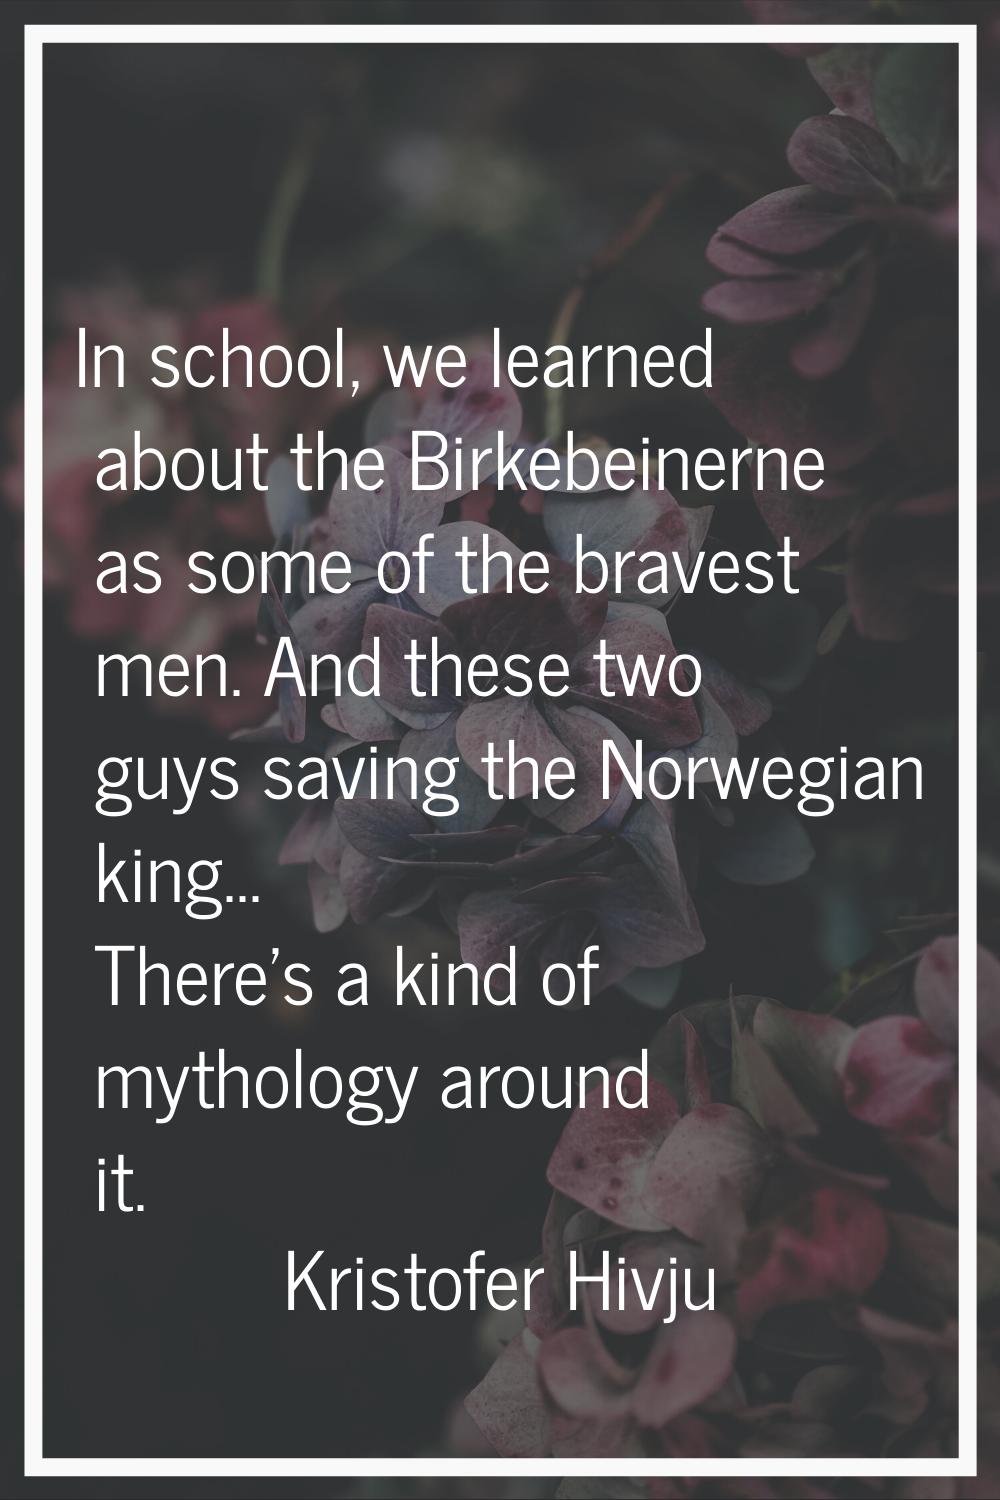 In school, we learned about the Birkebeinerne as some of the bravest men. And these two guys saving